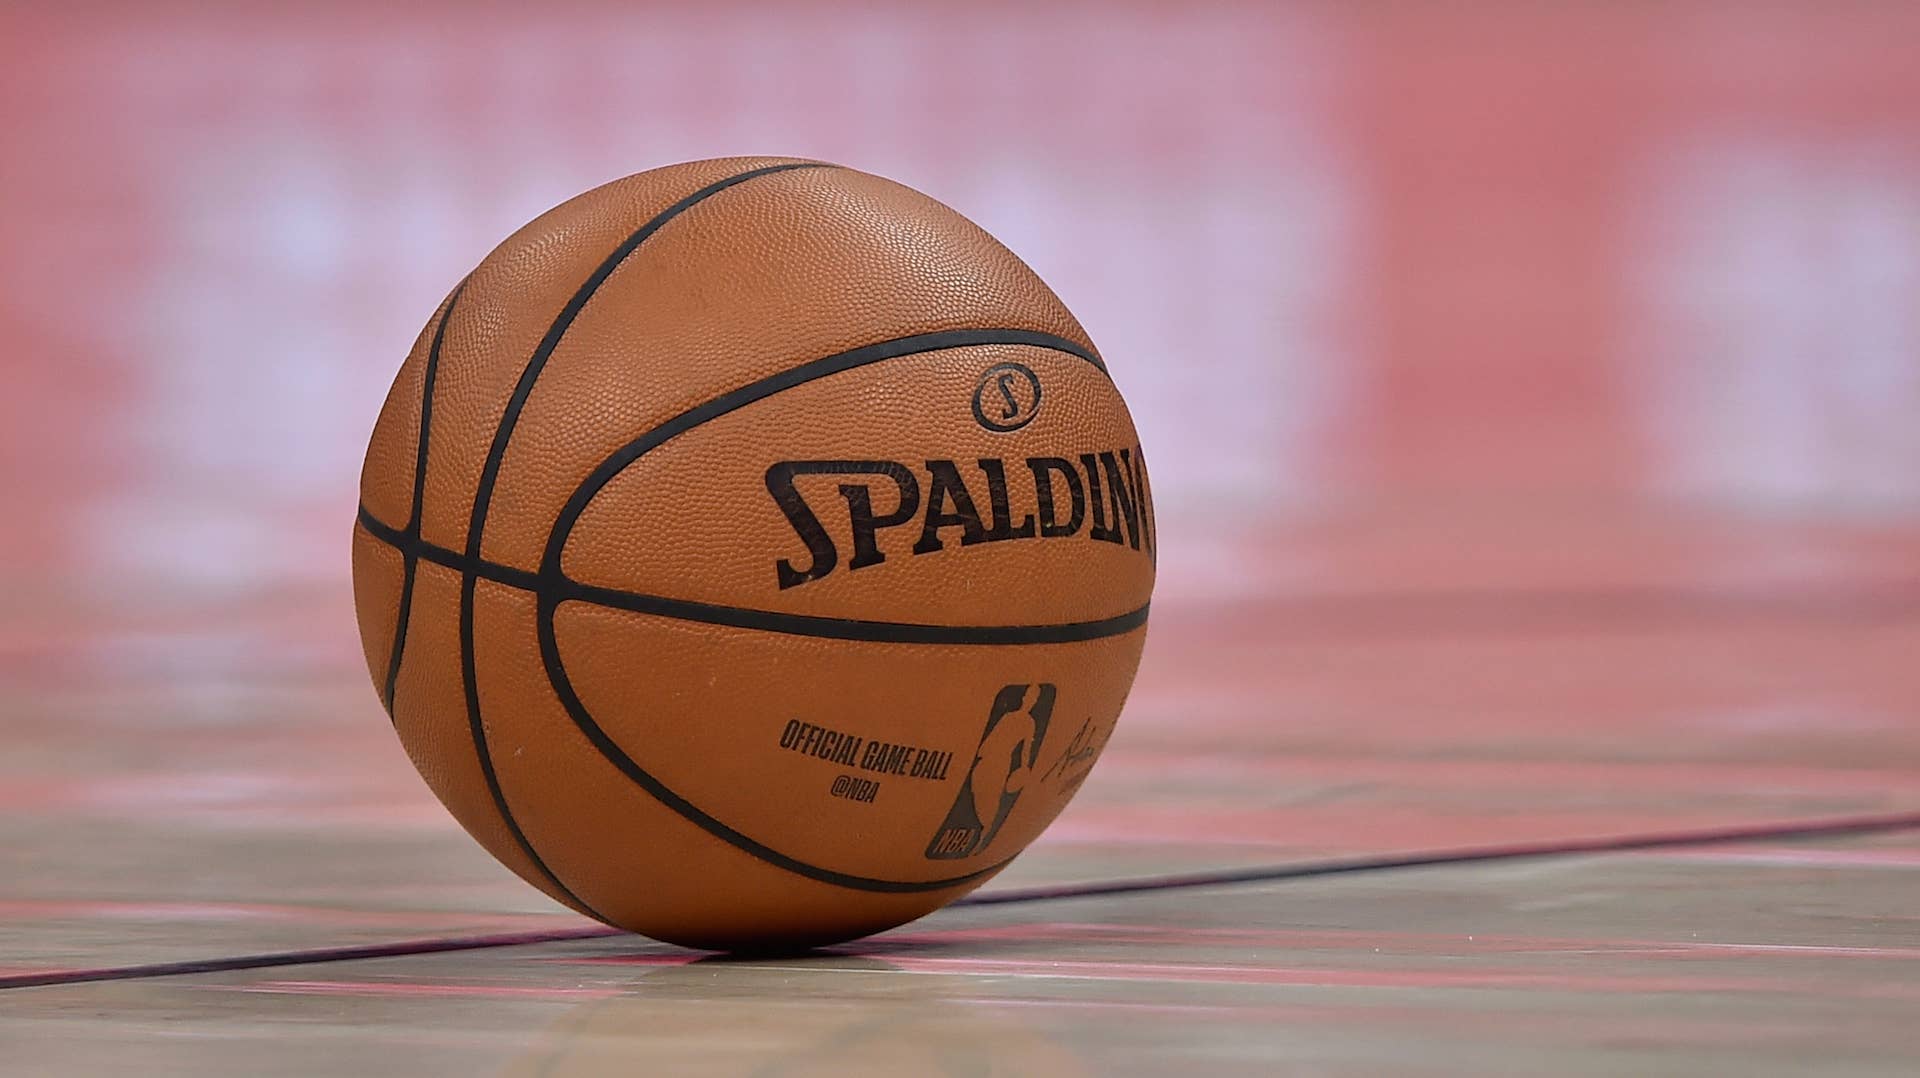 General view of the ball used in a NBA game between the Charlotte Hornets and the Utah Jazz